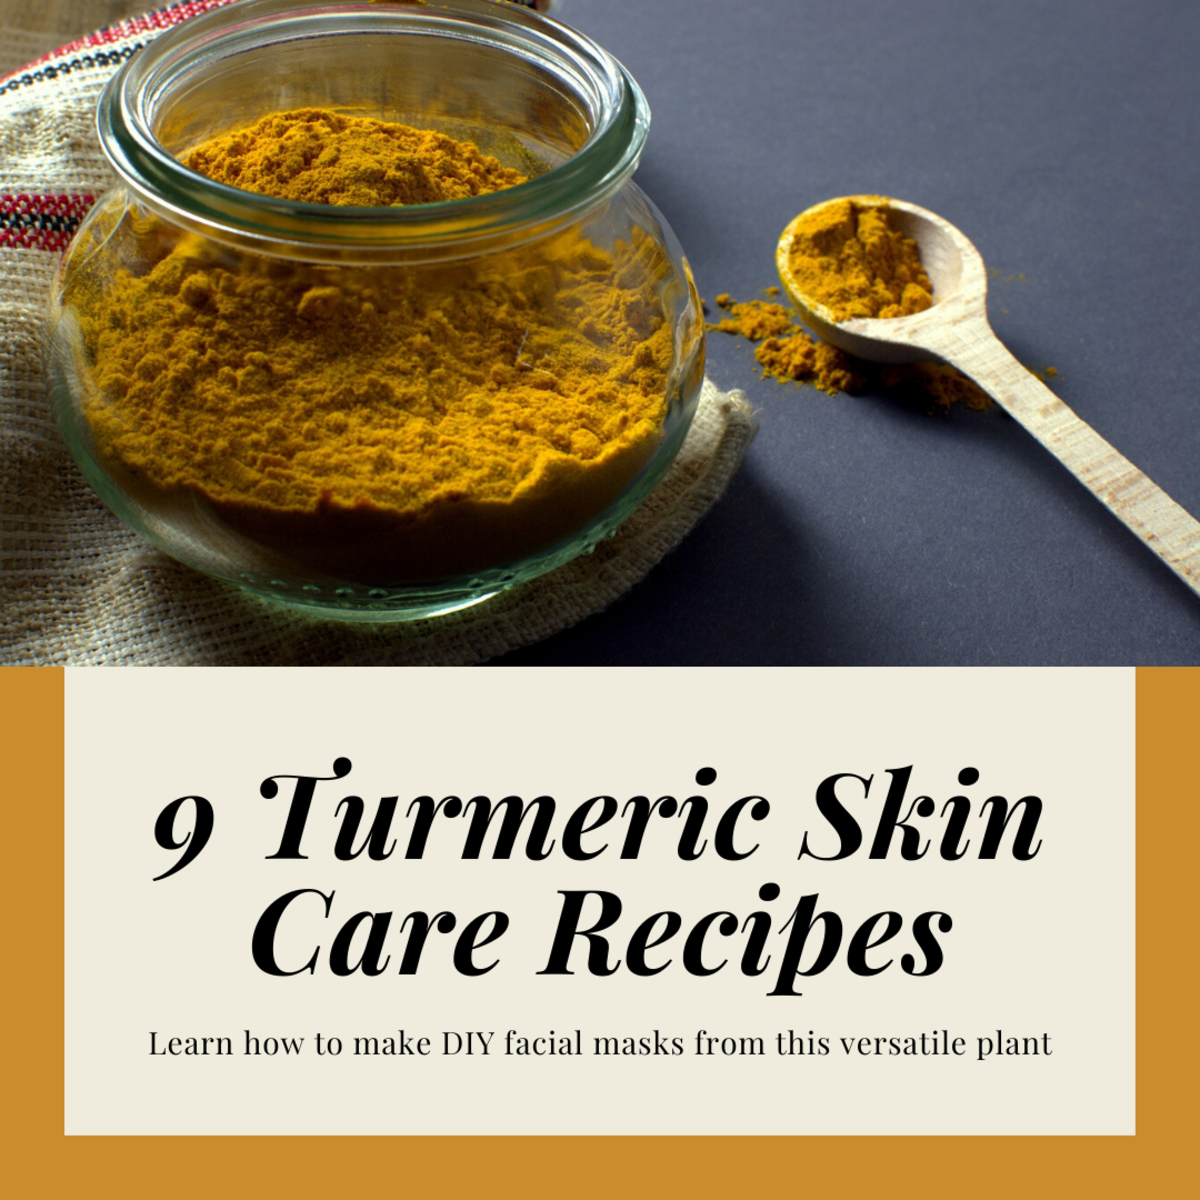 This article will provide various different recipes for skin care masks, all of which feature the wonderful turmeric plant.